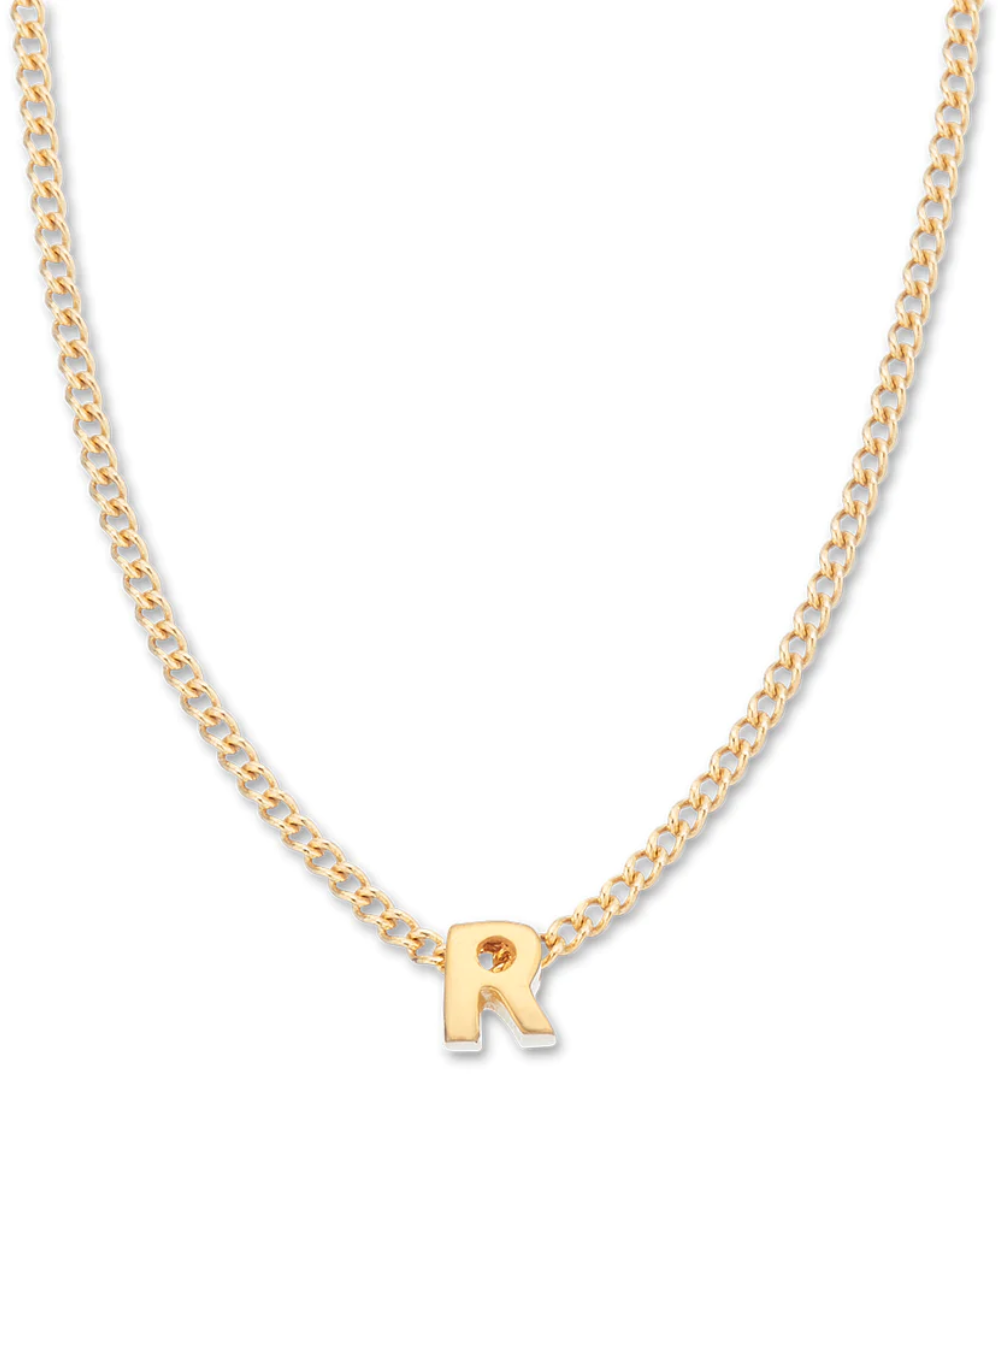 Tiny Love Letter Necklace - R